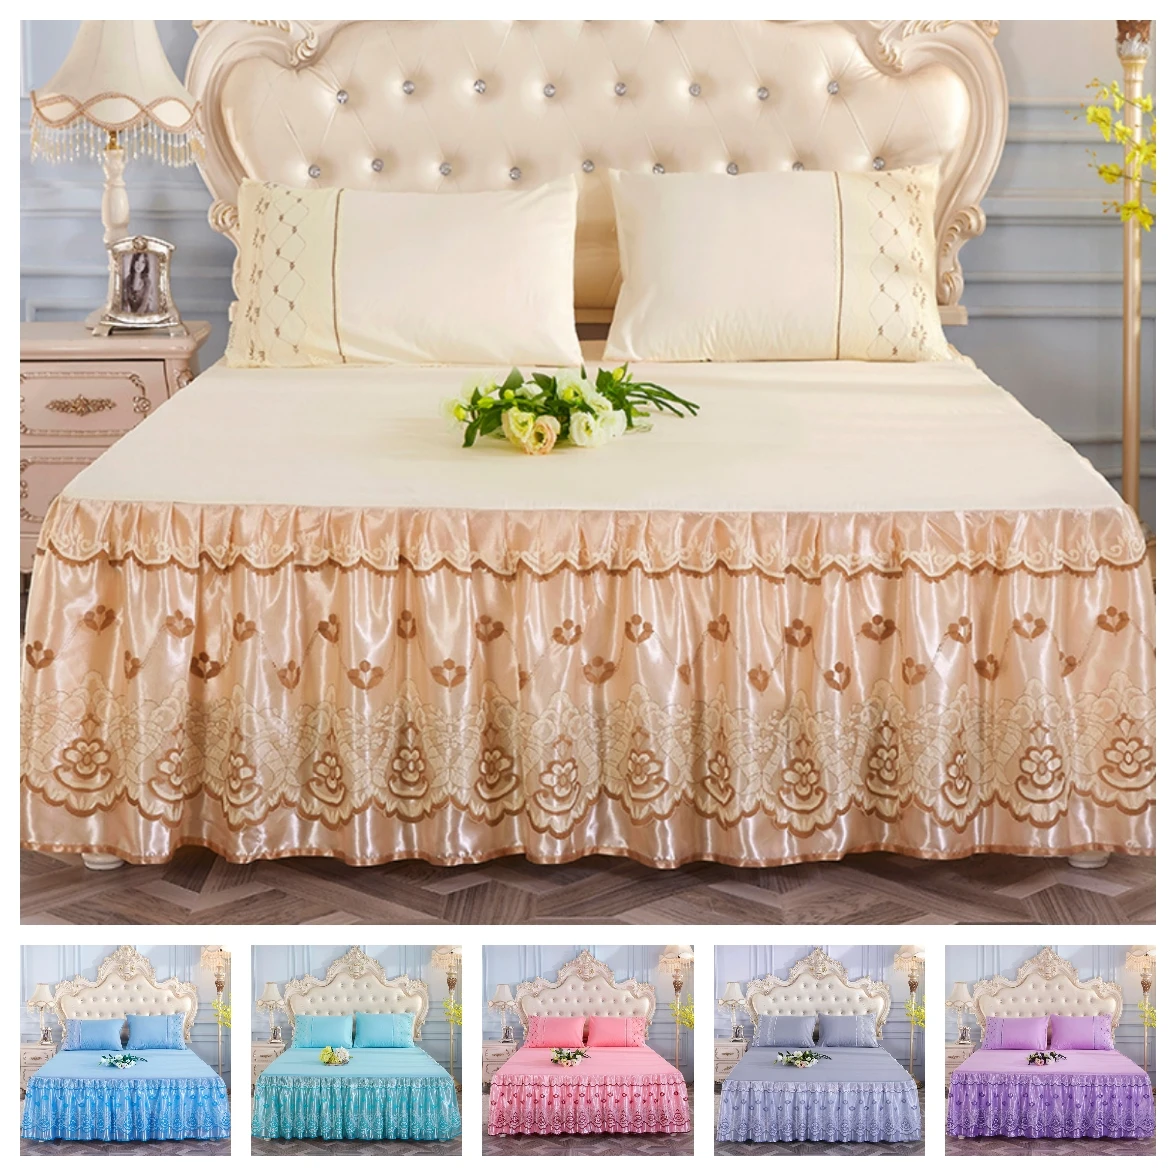 

3 Pcs Princess Bedding Solid Ruffled Bed Skirt Pillowcases Lace Bed Sheets Mattress Cover King Queen Full Twin Size Bed Cover